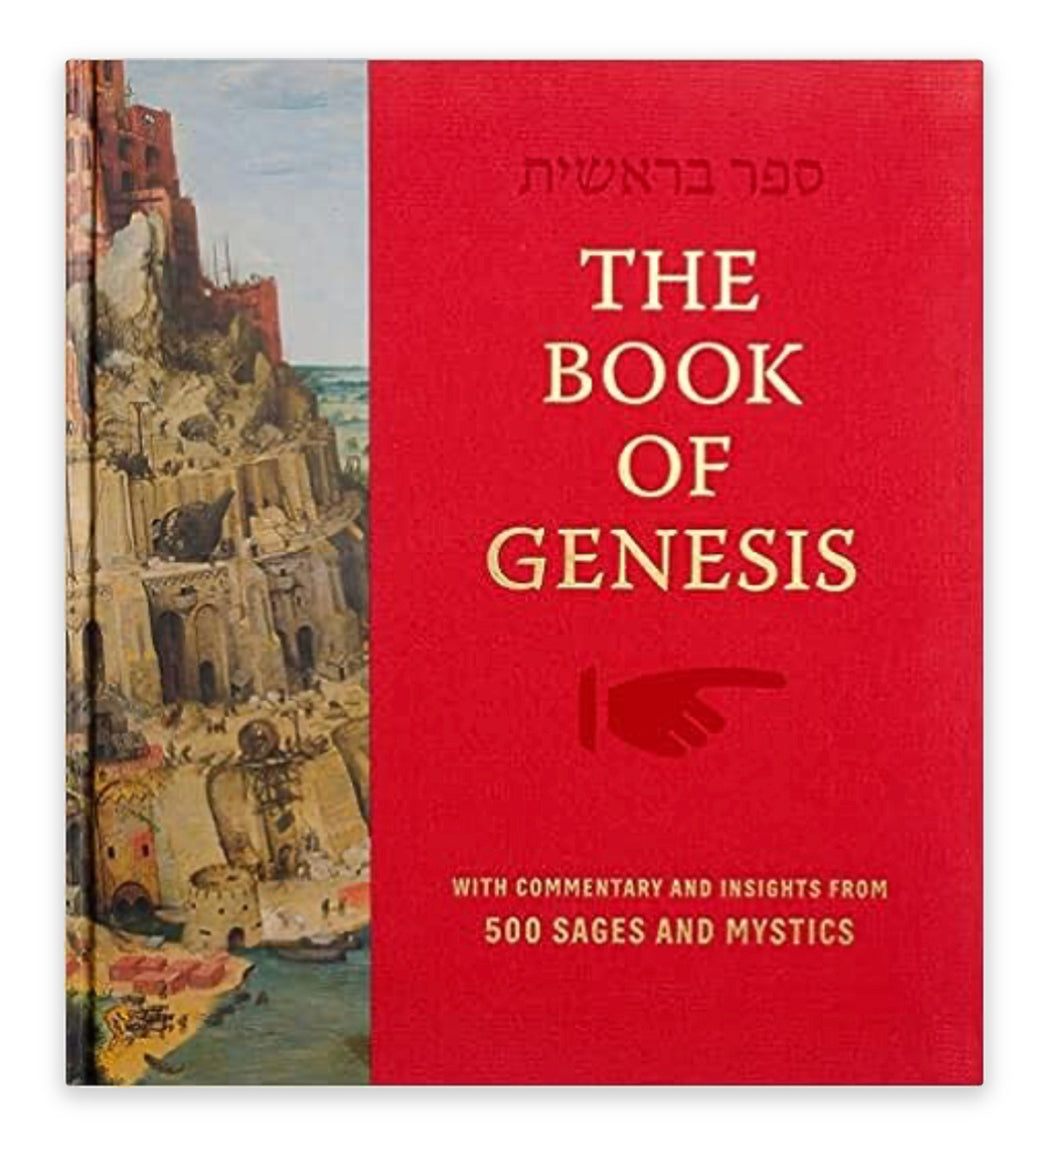 Book of Genesis with Commentary and Insights by 500 Sages and Mystics by Yanki Tauber (Author), Baruch Gorkin (Illustrator)